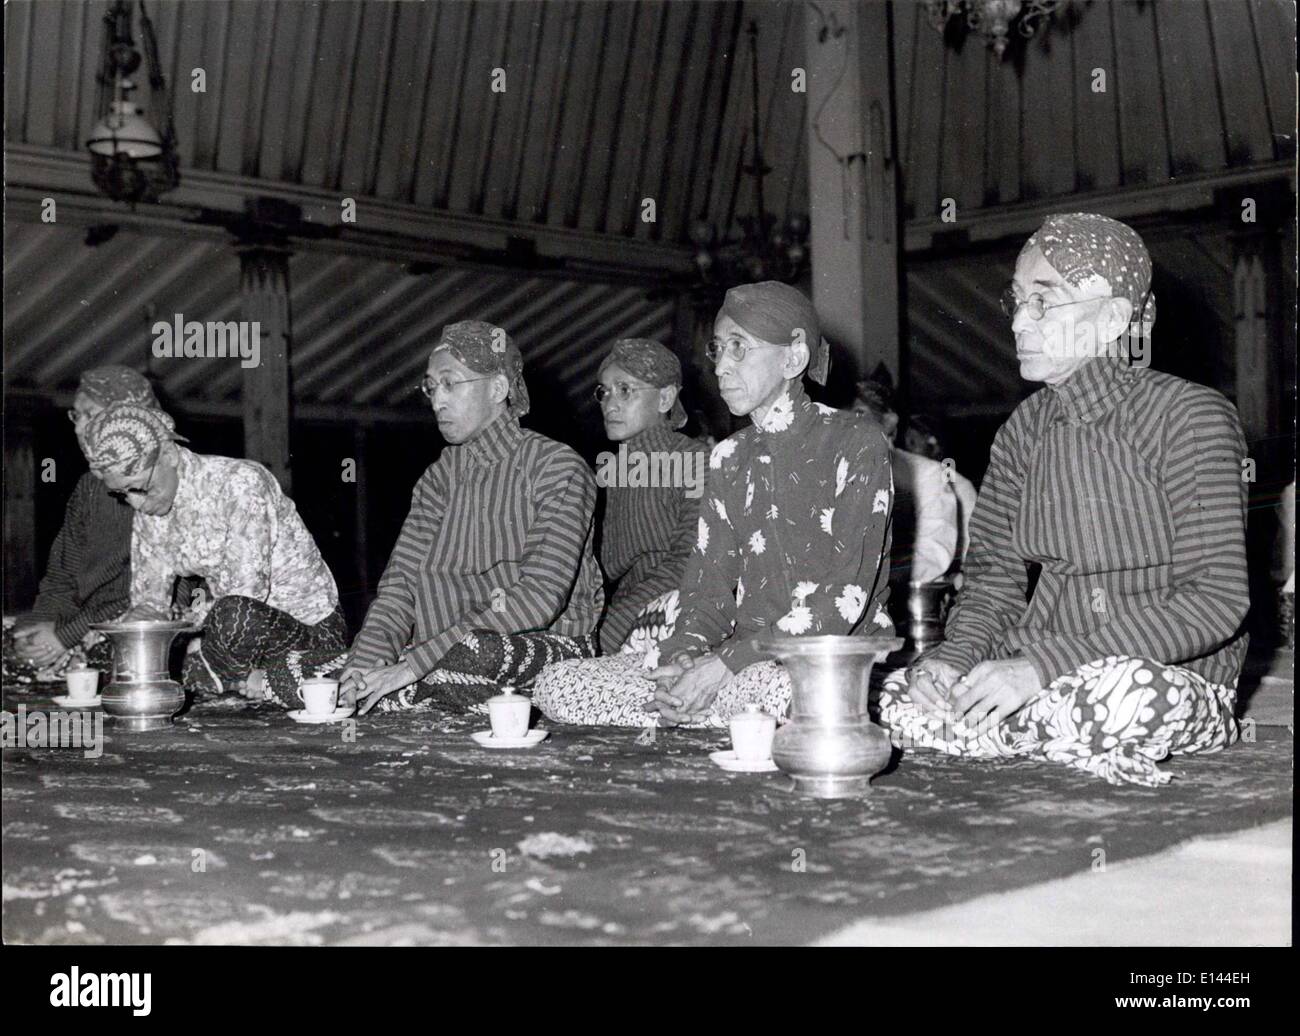 Apr. 04, 2012 - While the ''gamelin'' plays, the Sultan and Princess of Jogjakarta spend the entire night praying in the Royal Mosque, with spitoons and cups of tea nearby. Stock Photo